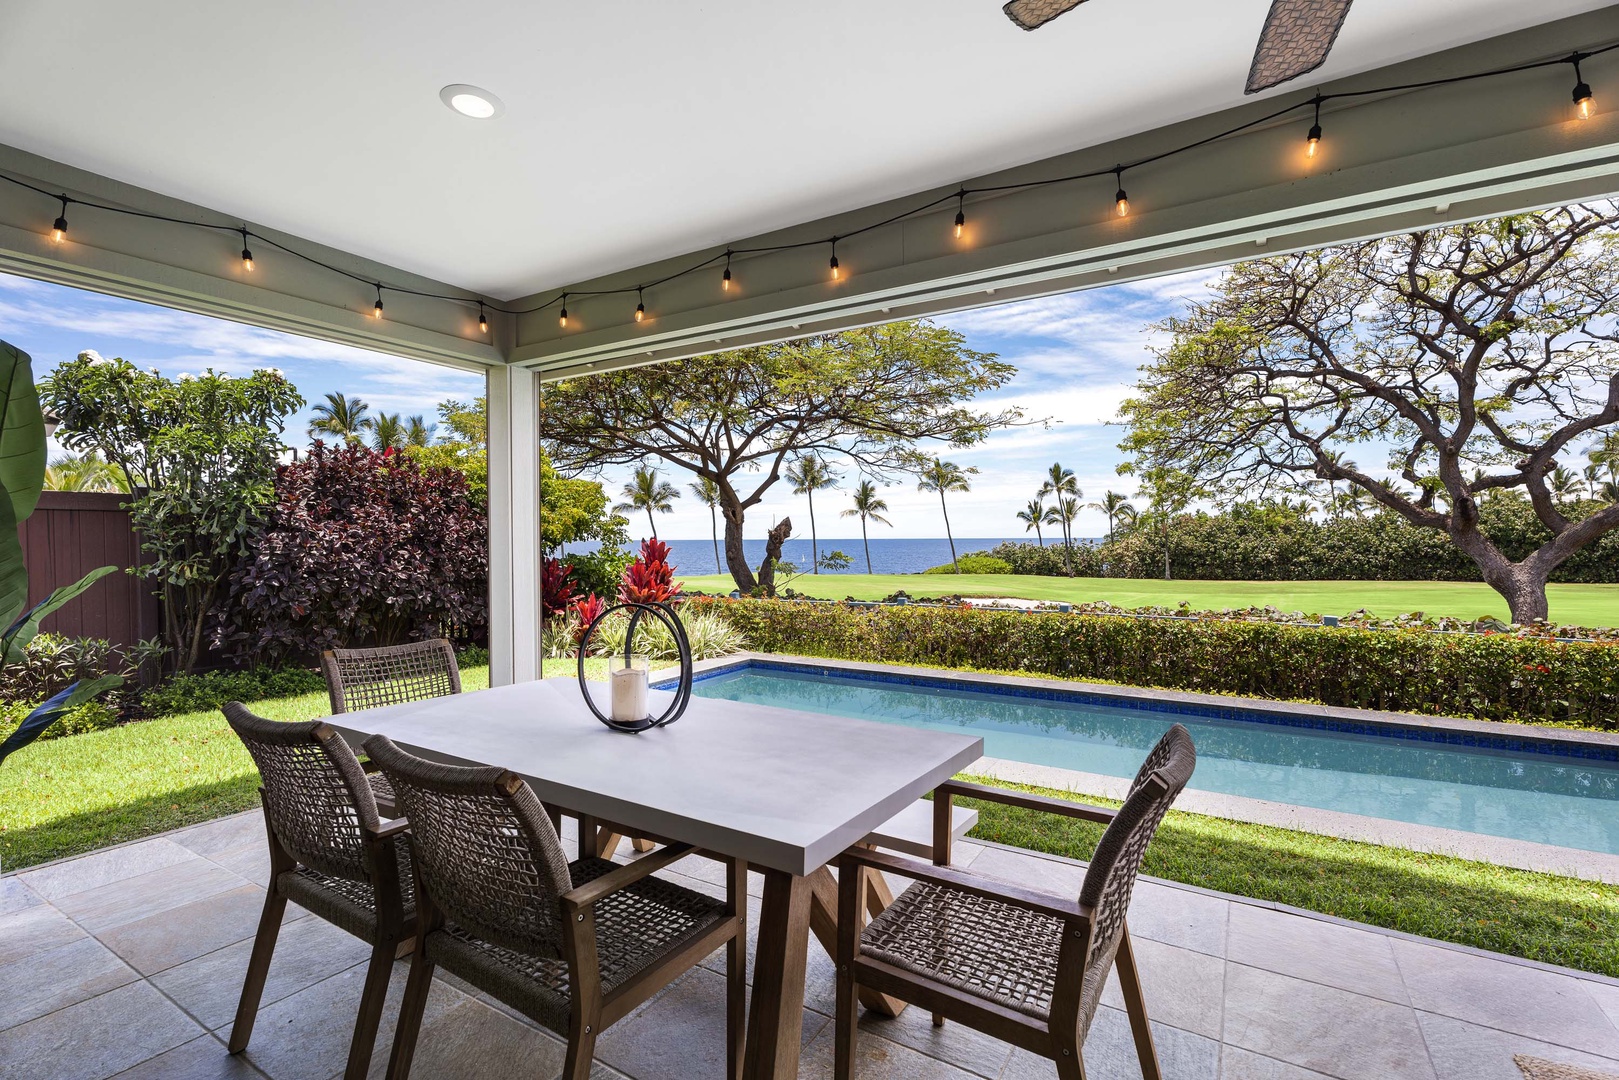 Kailua Kona Vacation Rentals, Holua Kai #27 - Soak up the sun on the beautiful beaches, explore the nearby attractions, and retreat to the comfort of this stunning vacation rental